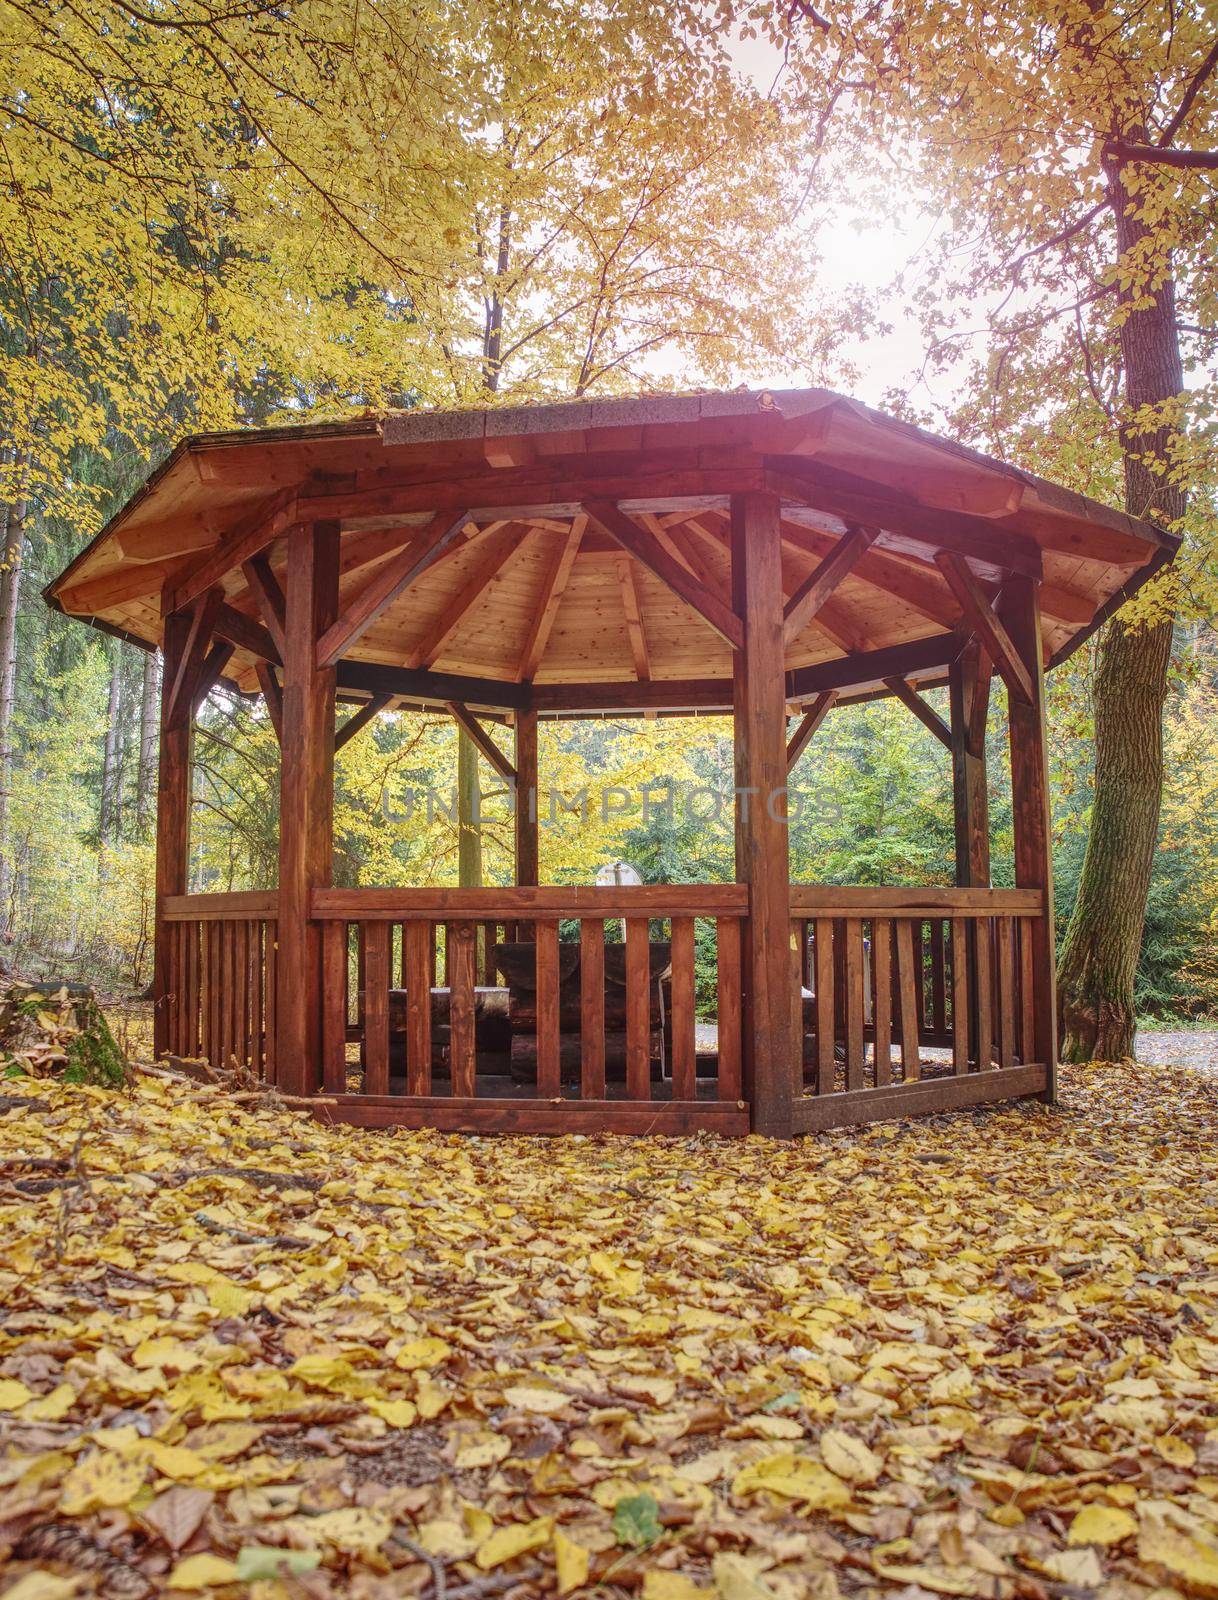 Renewal wooden Arbor or pavilon in leaves forest in fall season. Place for leisure travelers. Concept: environment protect nature 